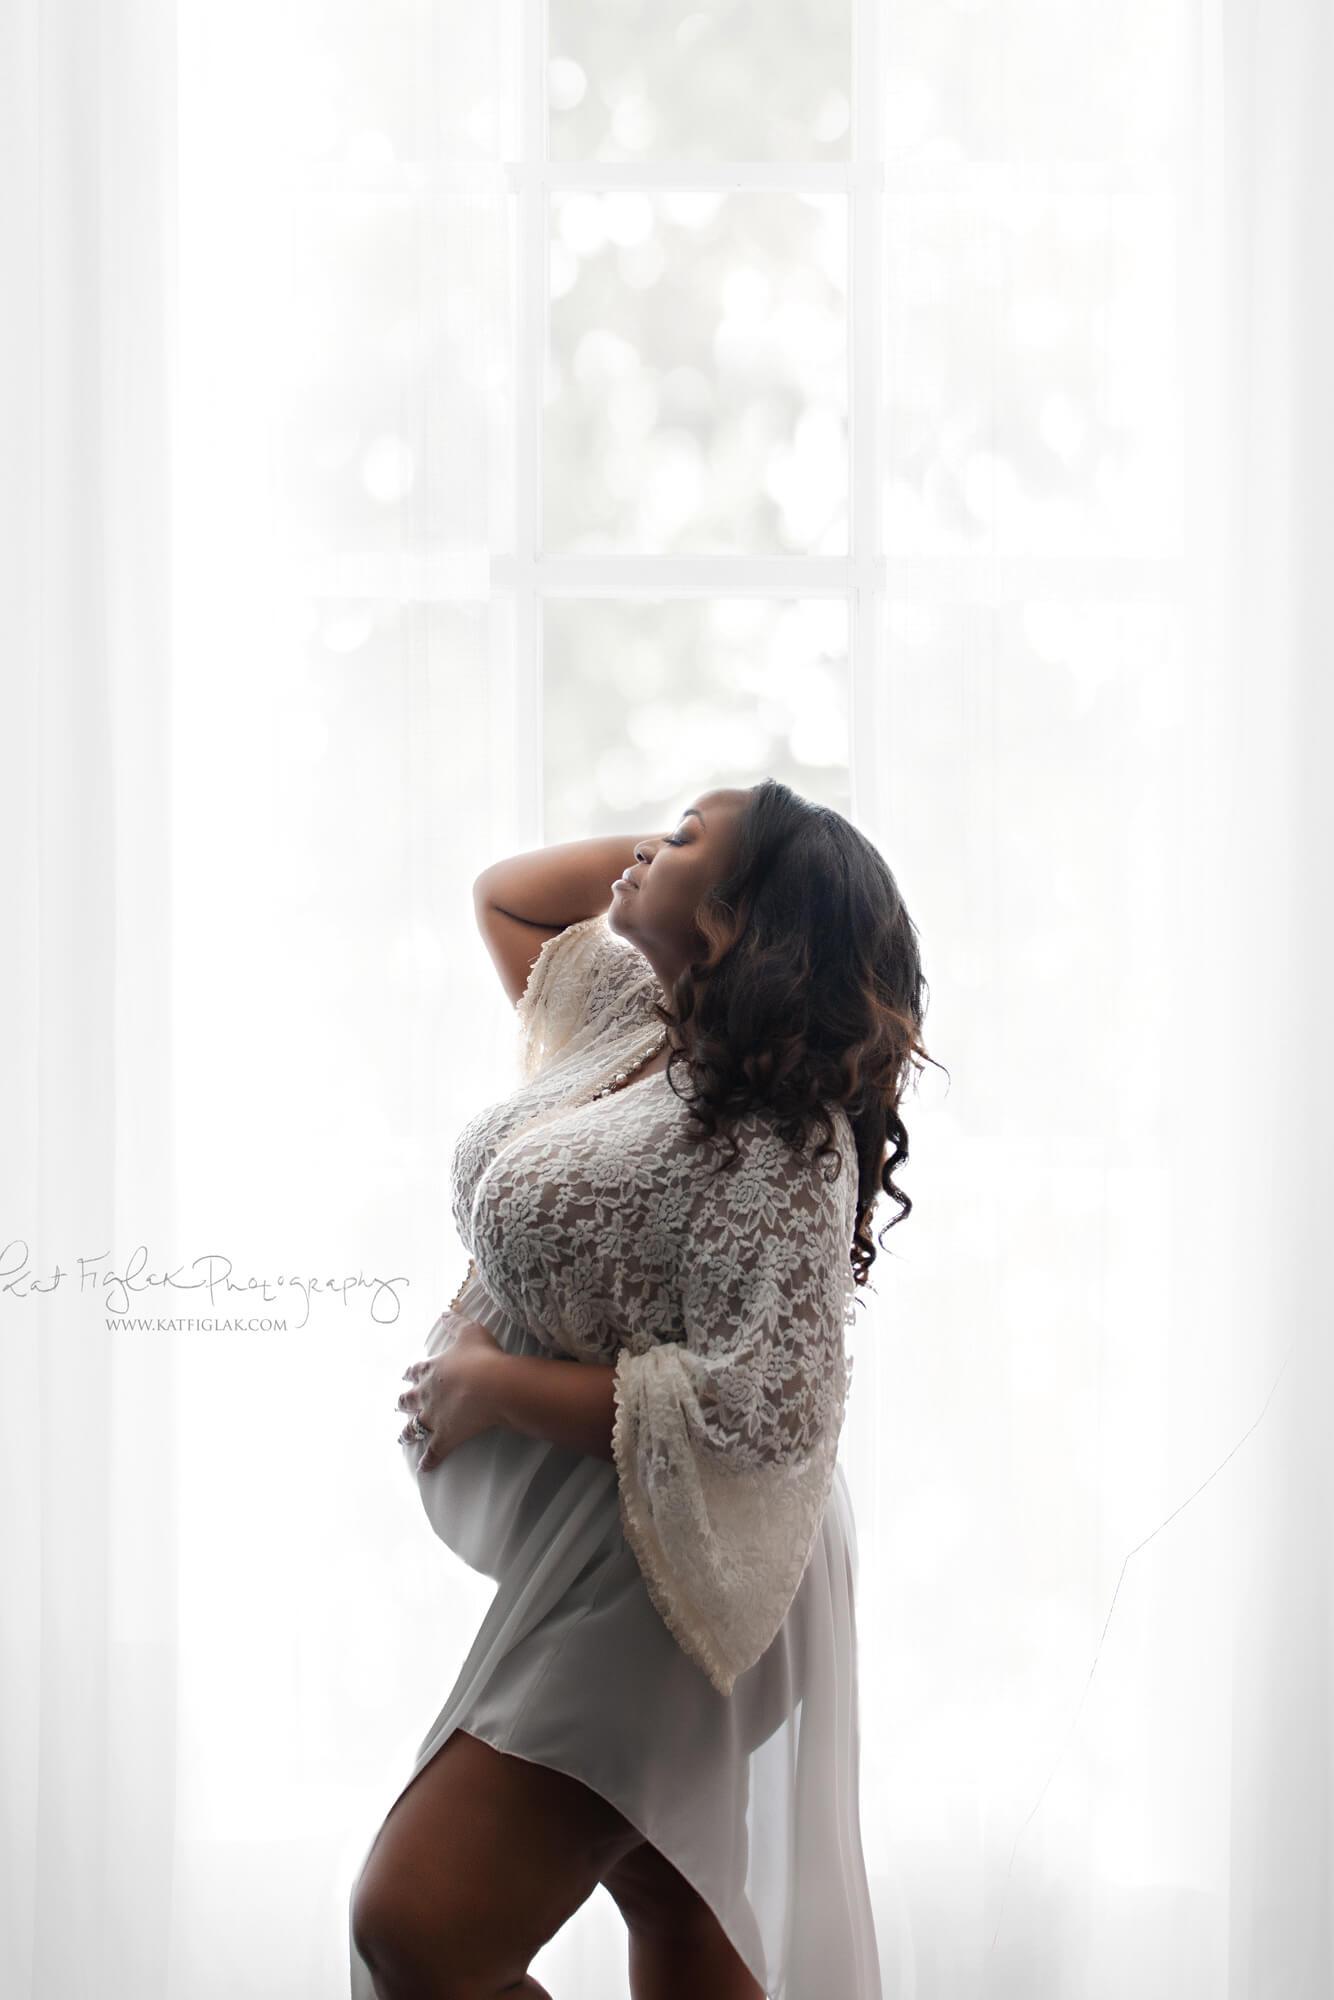 Pregnant model poses in studio during a maternity photosession. She holds her head with one hand and her belly with the other. She wears an off white long dress made of lace and chiffon. Her eyes are closed and facing up. 